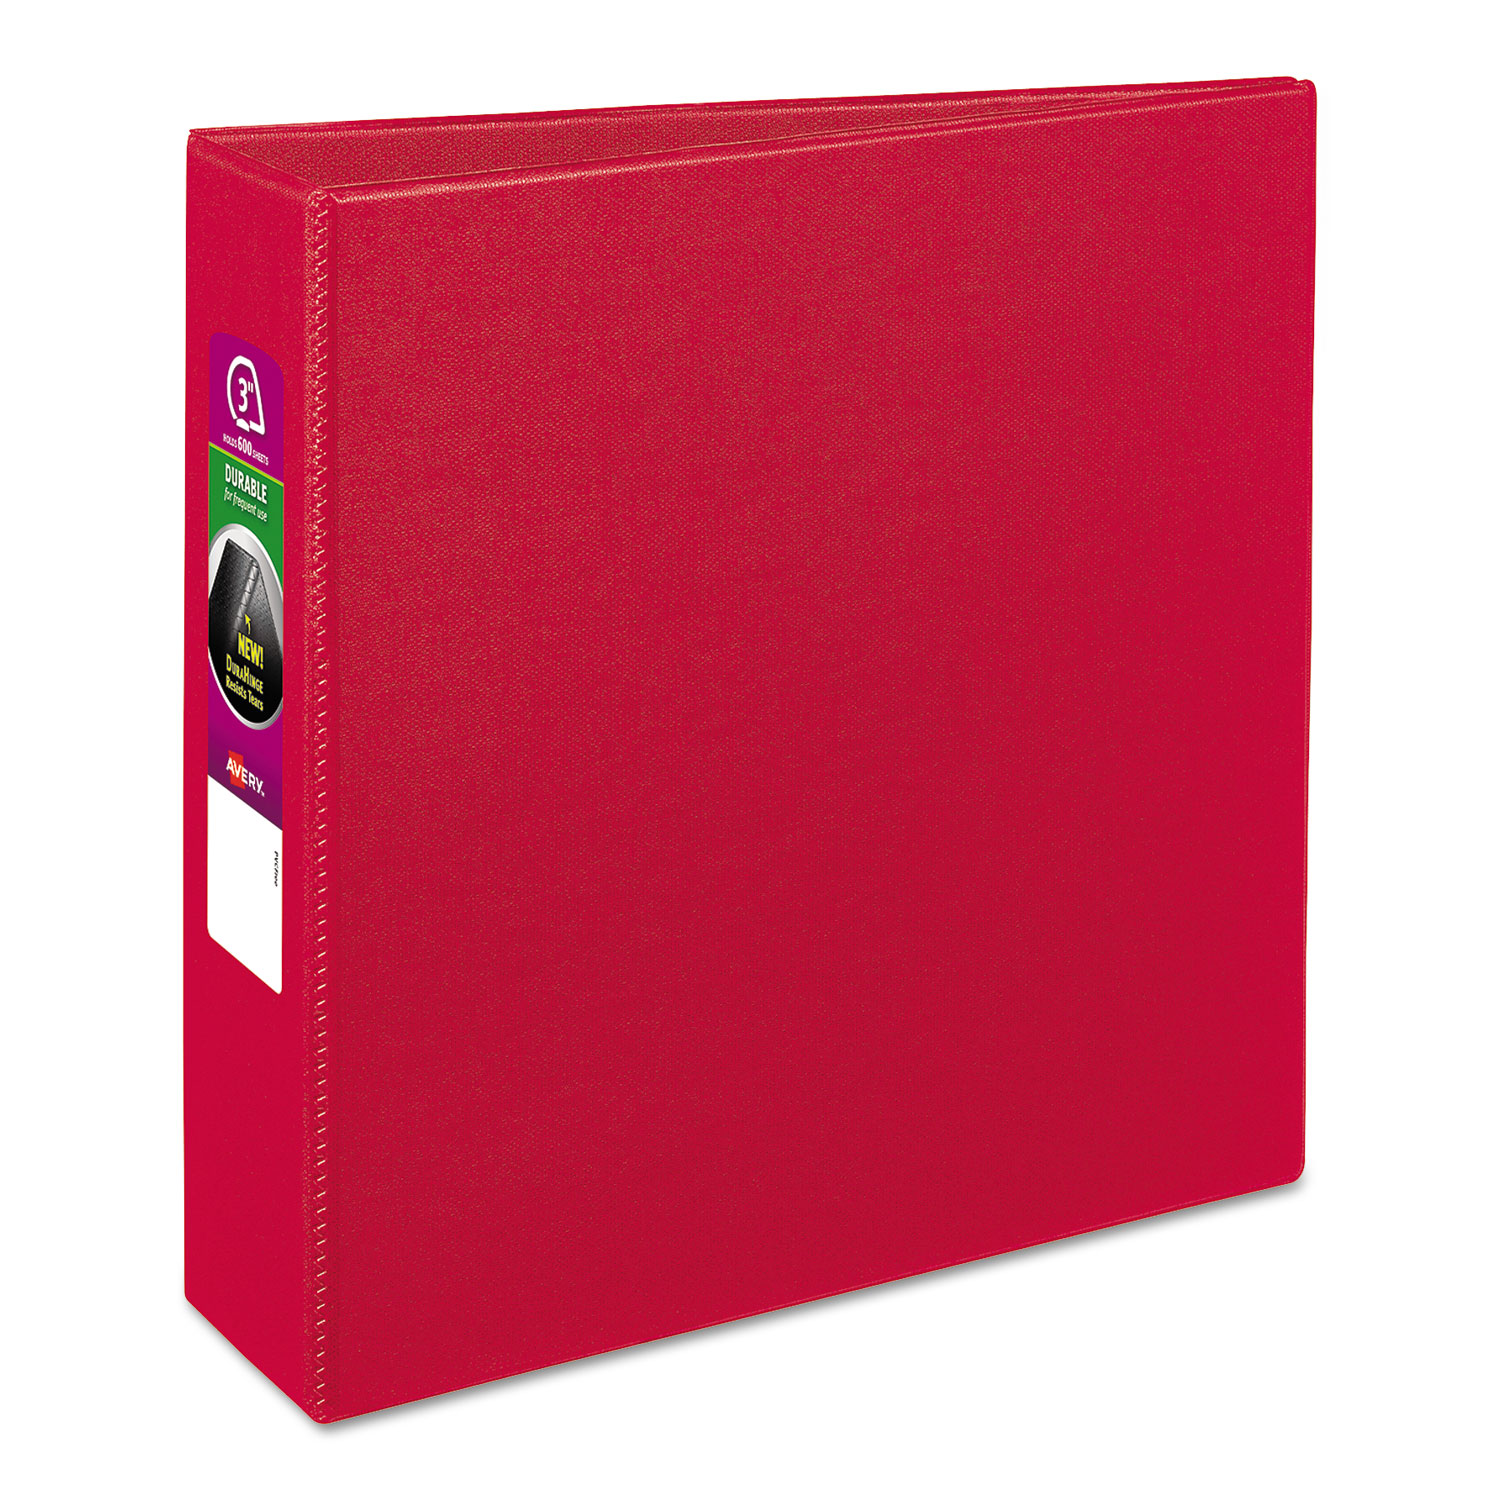  Avery 27204 Durable Non-View Binder with DuraHinge and Slant Rings, 3 Rings, 3 Capacity, 11 x 8.5, Red (AVE27204) 